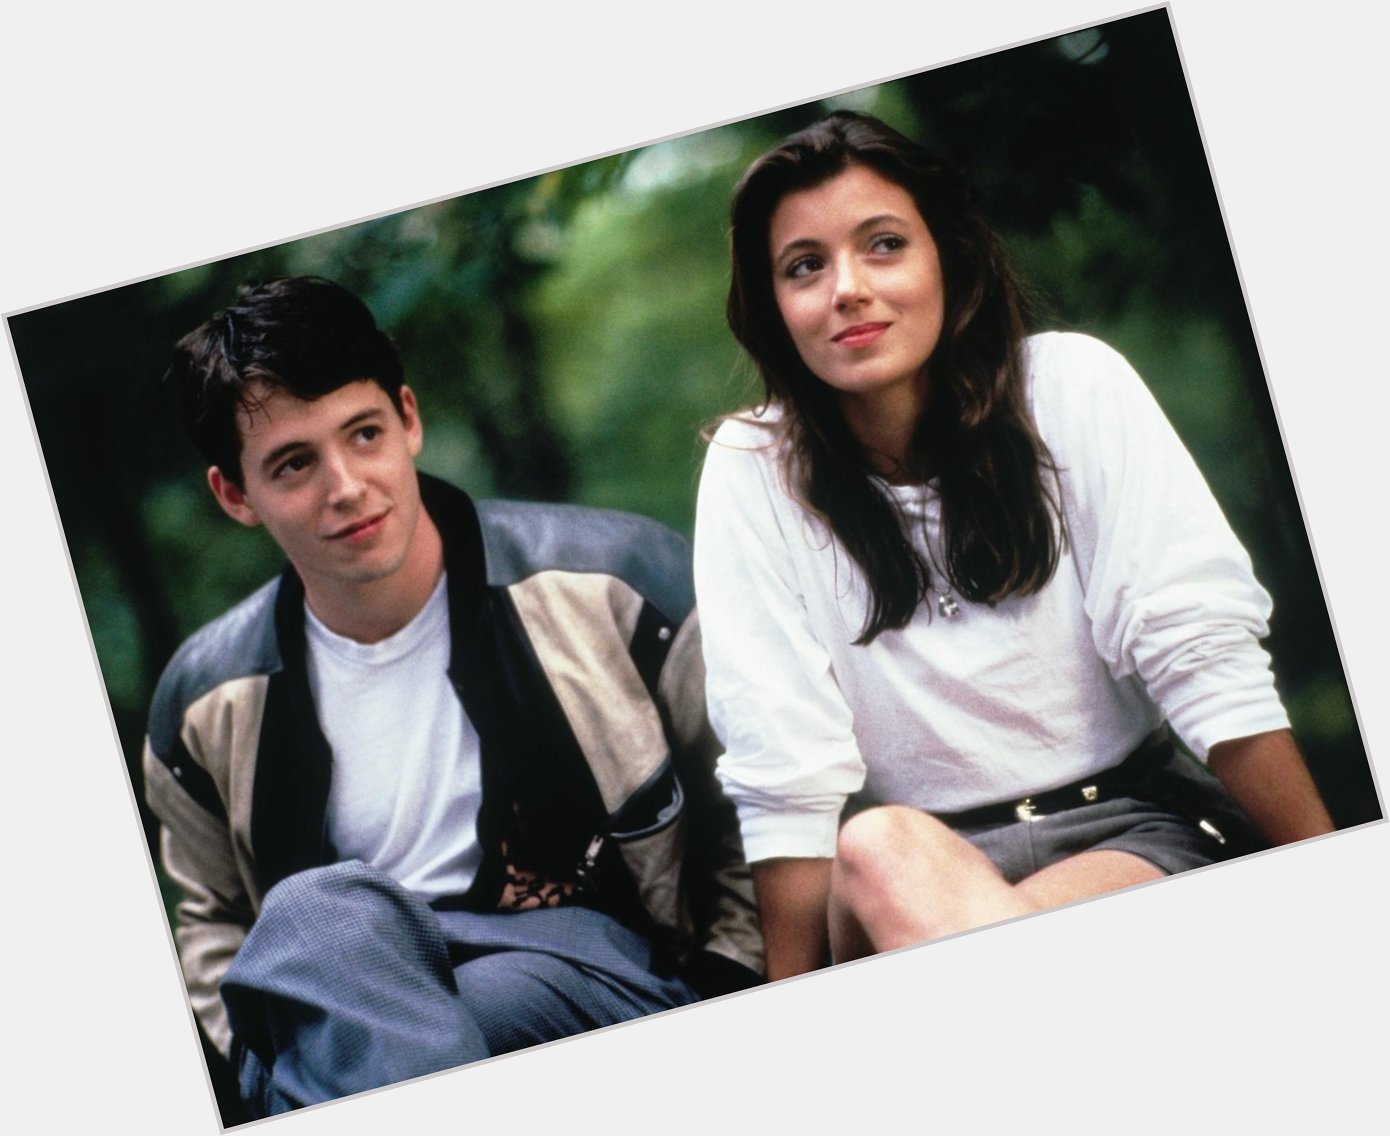 Wishing Mia Sara a happy 50th birthday! You\ll always be the coolest girl in school in our book. 